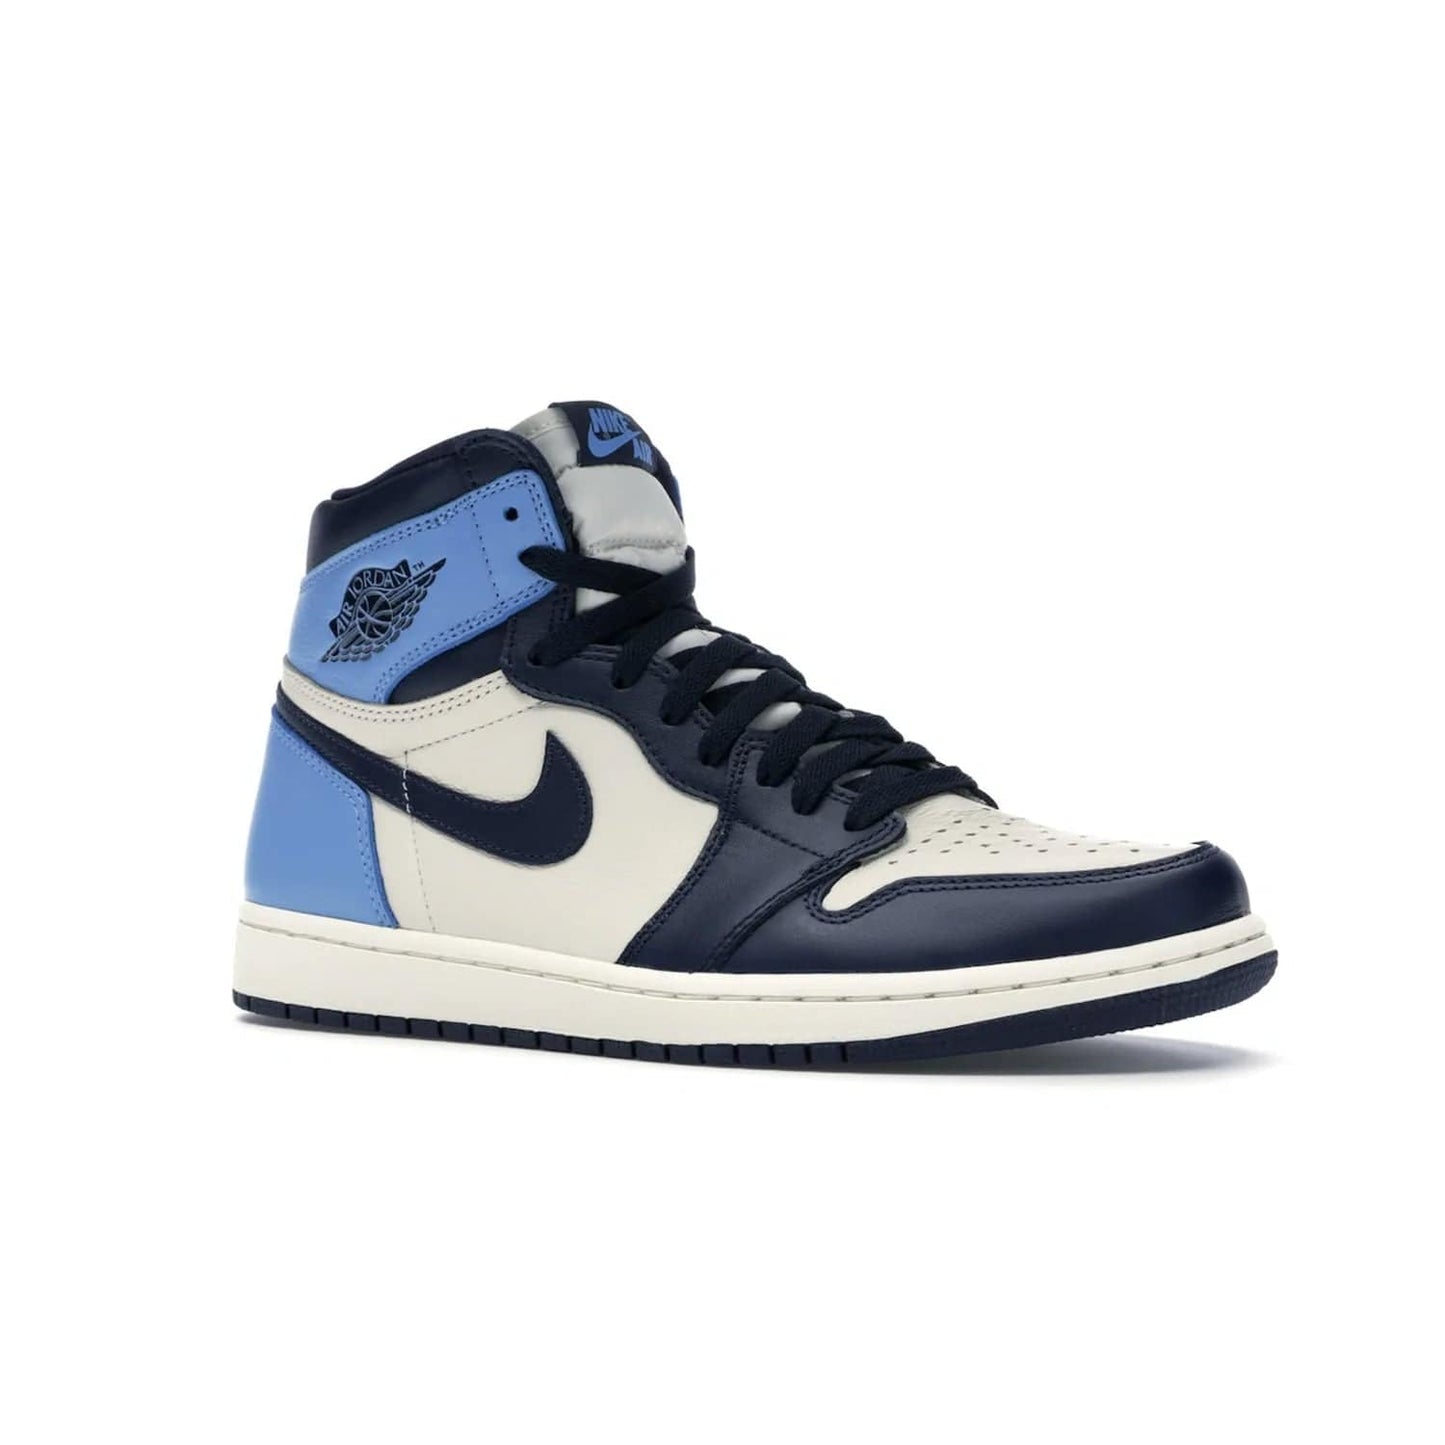 Jordan 1 Retro High Obsidian UNC - Image 4 - Only at www.BallersClubKickz.com - Bring a timeless classic to your wardrobe with the Air Jordan 1 Retro High "Obsidian/University Blue”. A full leather upper combines Obsidian and University Blue detailing for a retro Jordan style. Stitched Jumpman logo pays tribute to UNC. Experience classic style with a timeless sneaker.